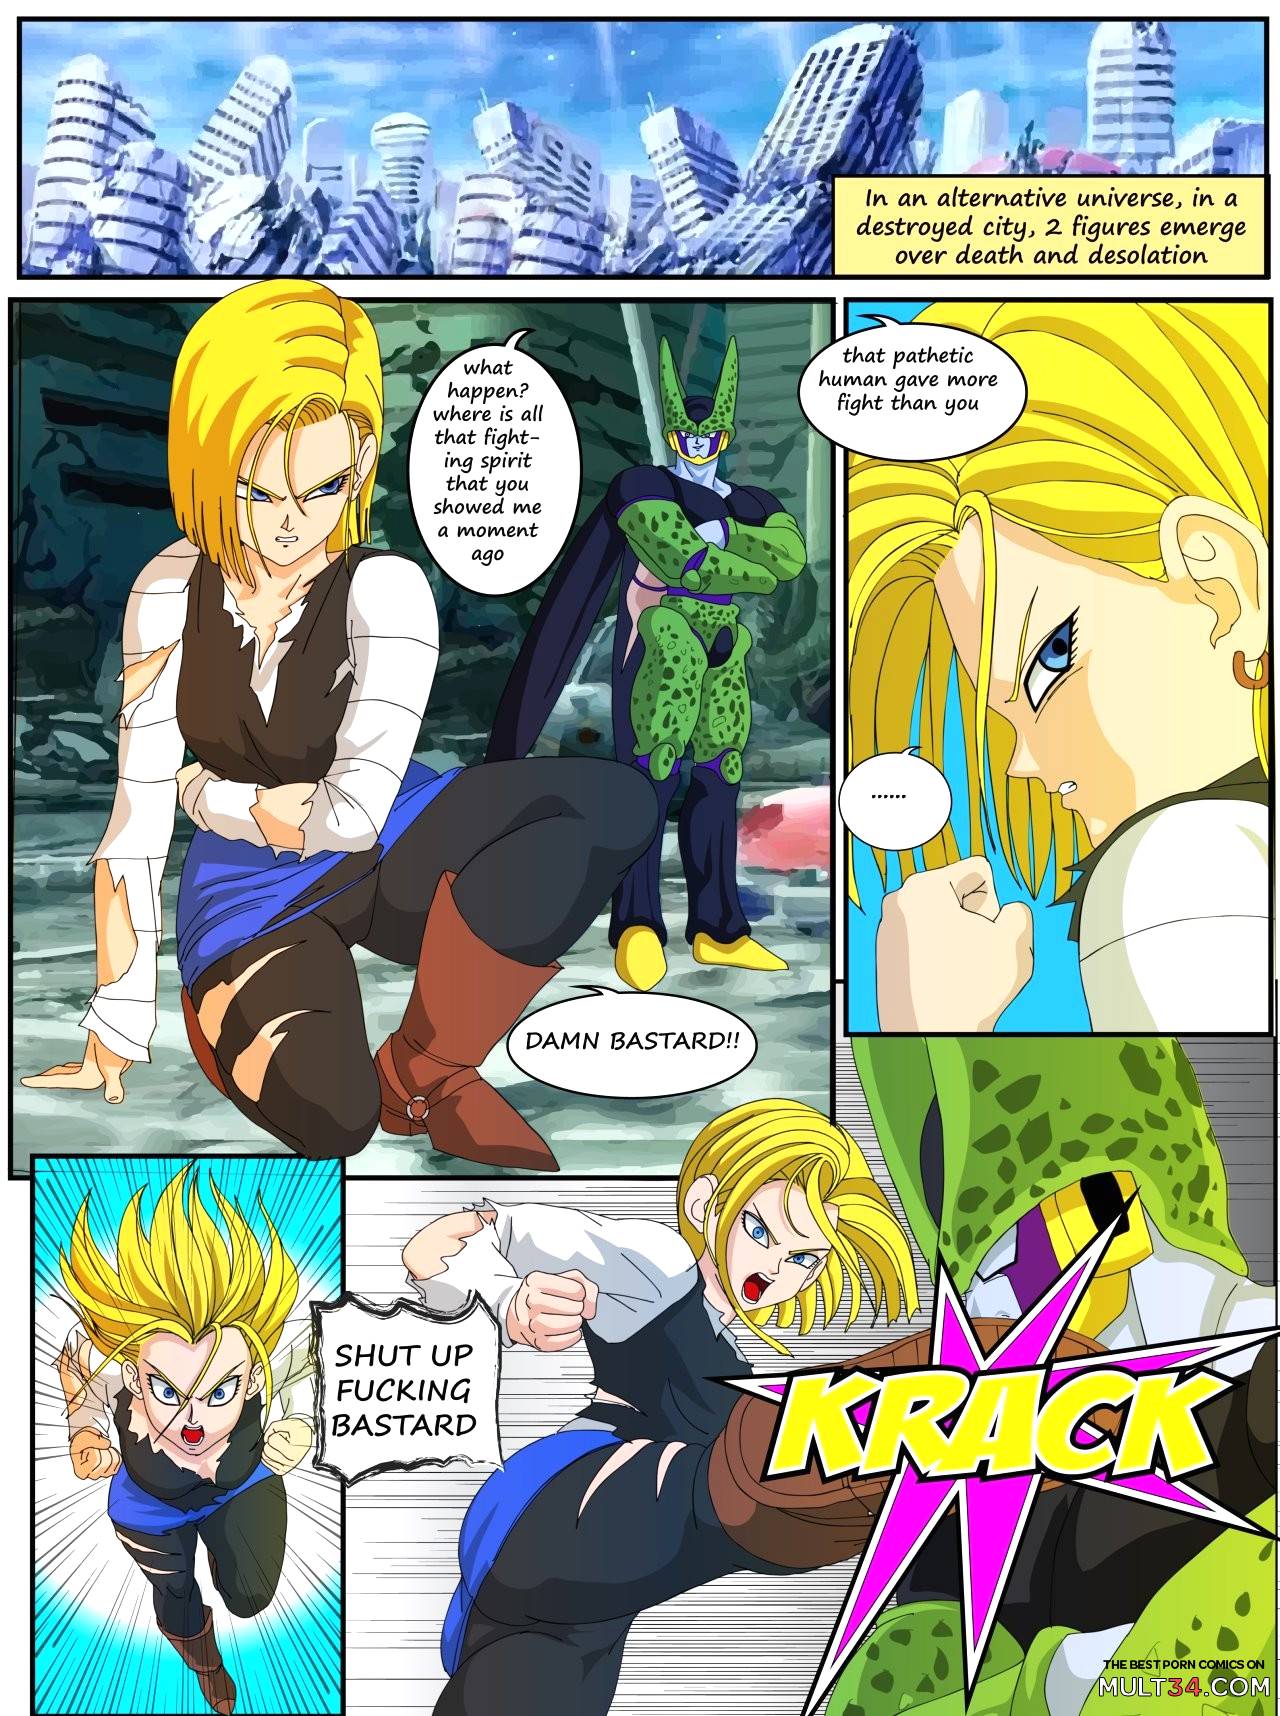 Dbz android 18 porn comic